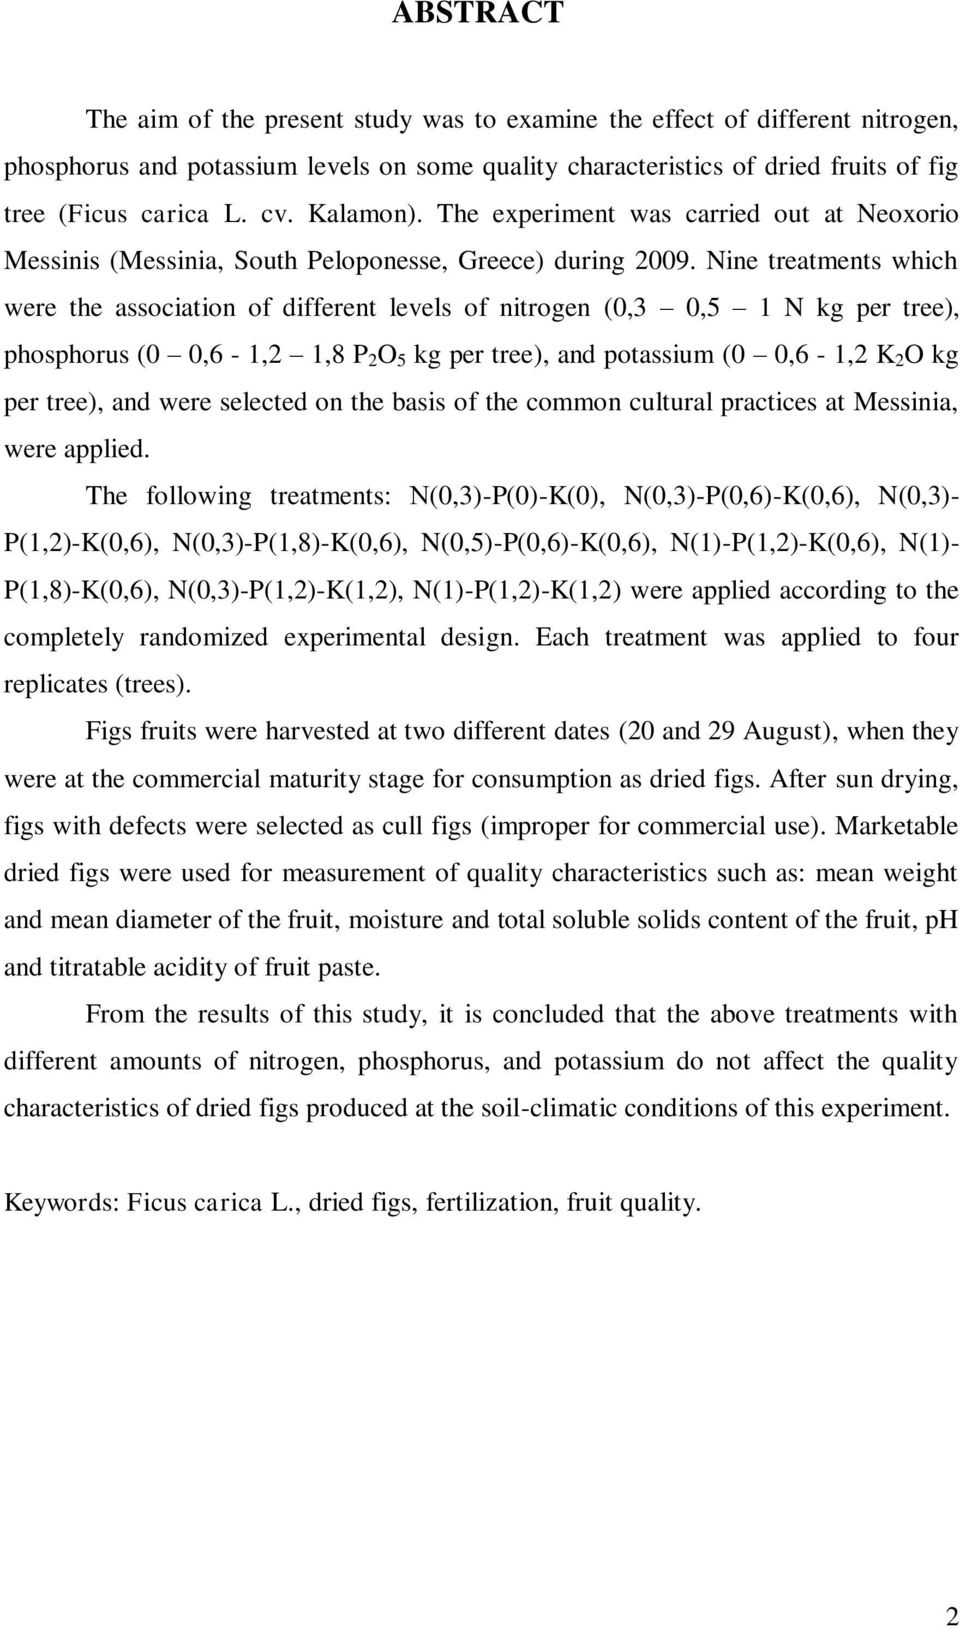 Nine treatments which were the association of different levels of nitrogen (0,3 0,5 1 N kg per tree), phosphorus (0 0,6-1,2 1,8 P 2 O 5 kg per tree), and potassium (0 0,6-1,2 K 2 O kg per tree), and